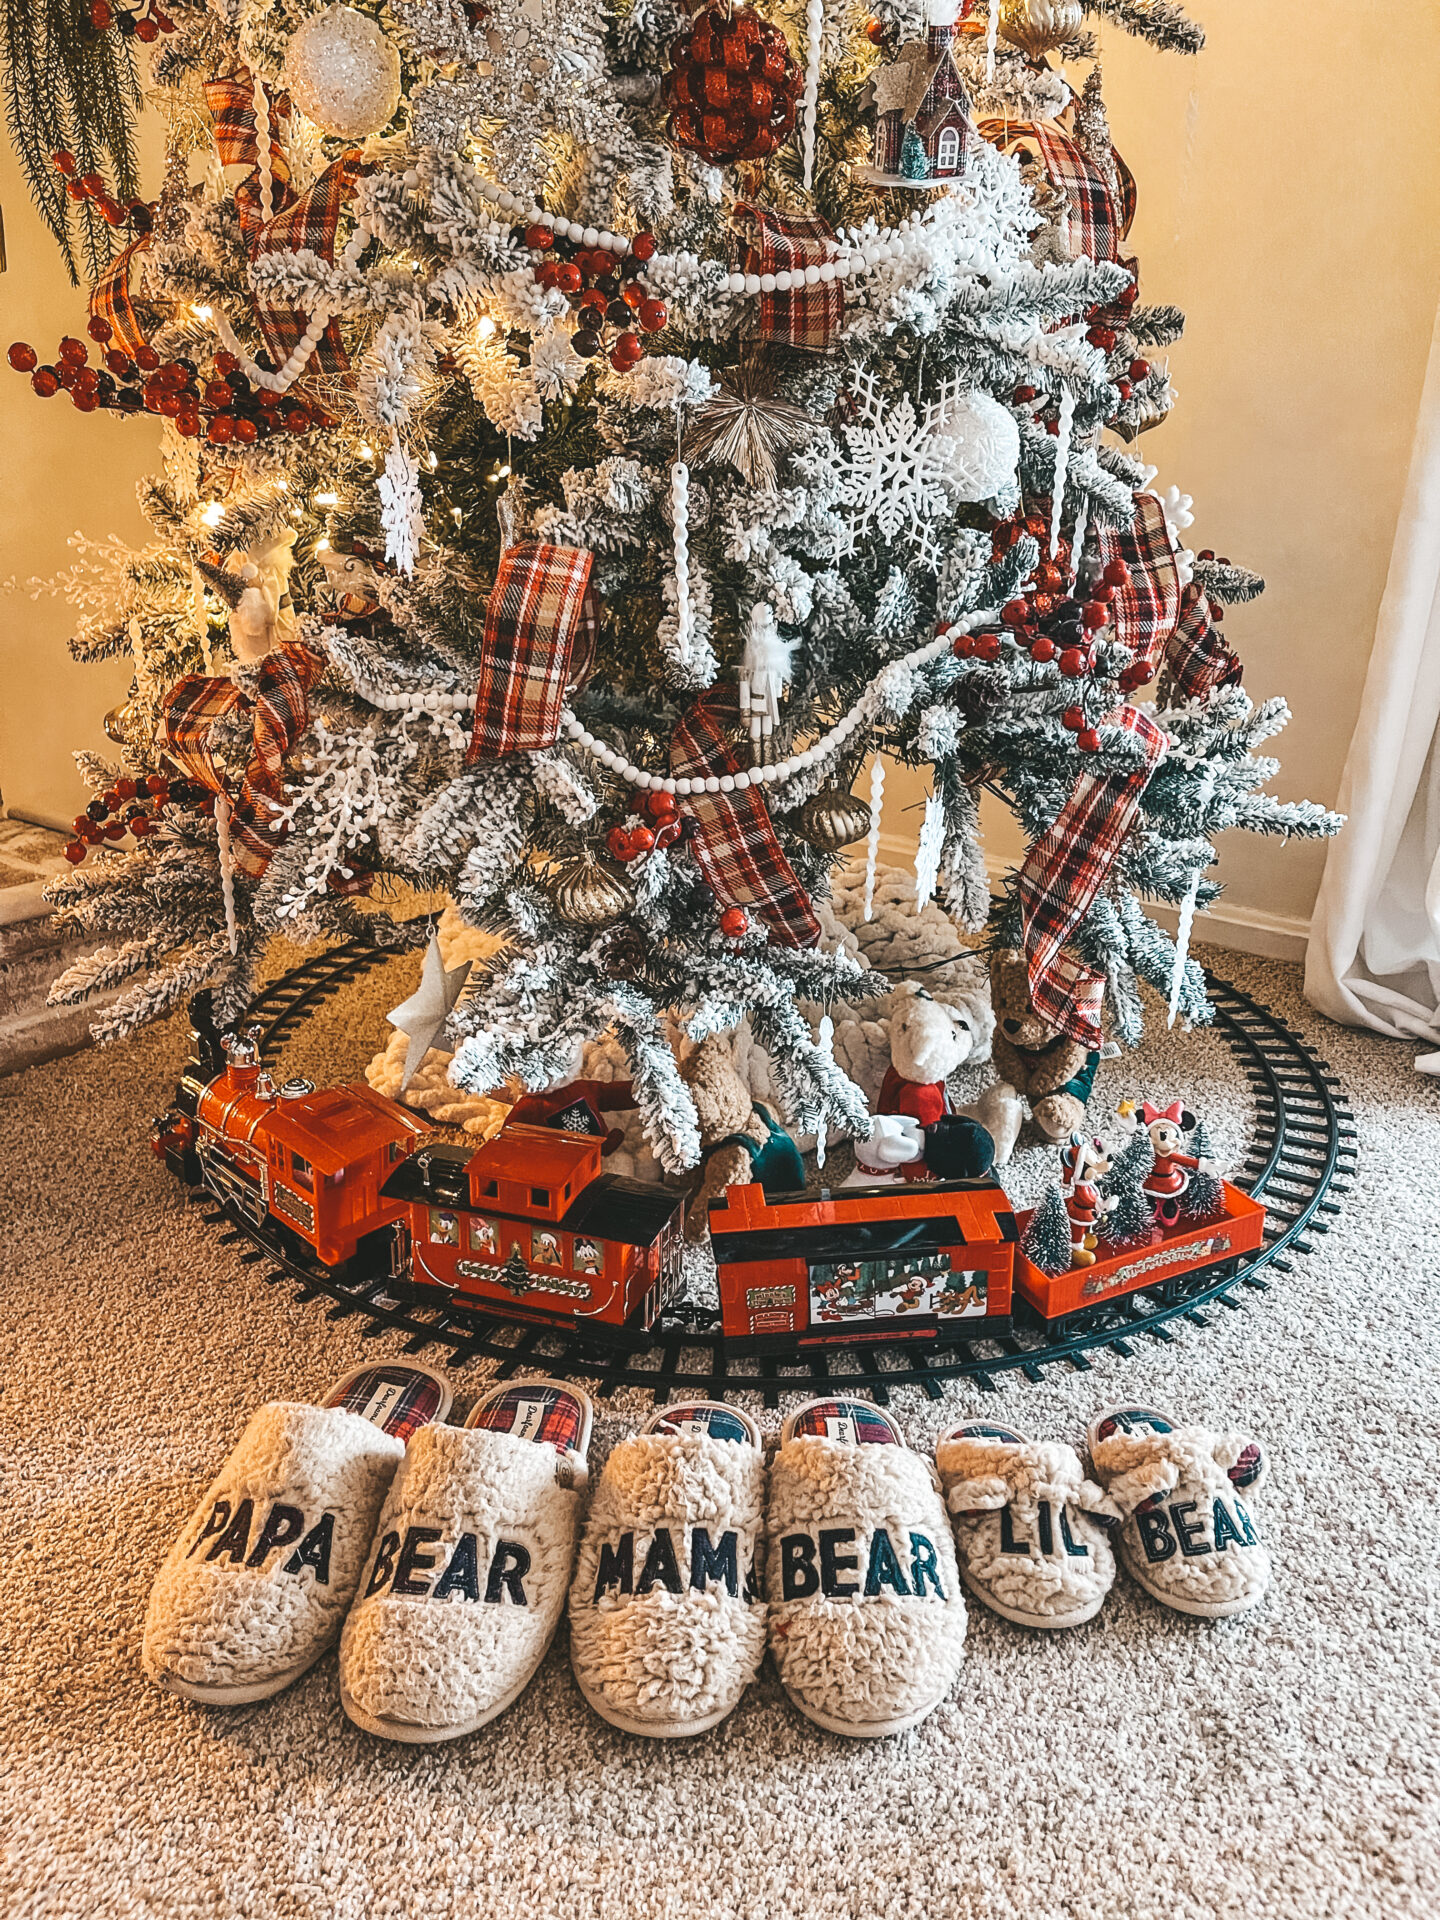 Big Lots Christmas decor - affordable holiday decorations by home lifestyle blogger Angela Lanter